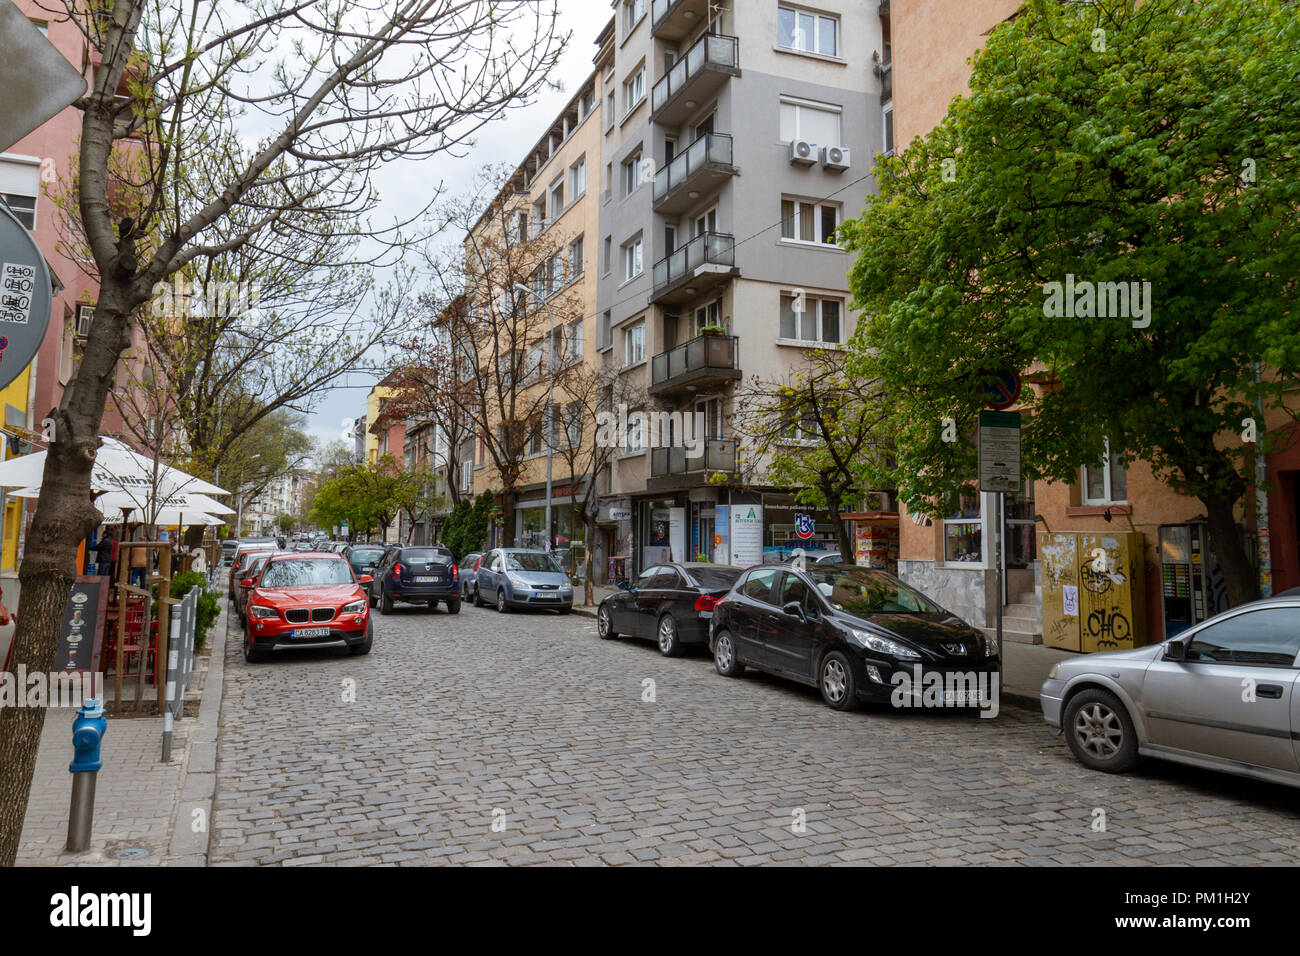 General street view of a cobbled side street in Sofia, Bulgaria. Stock Photo